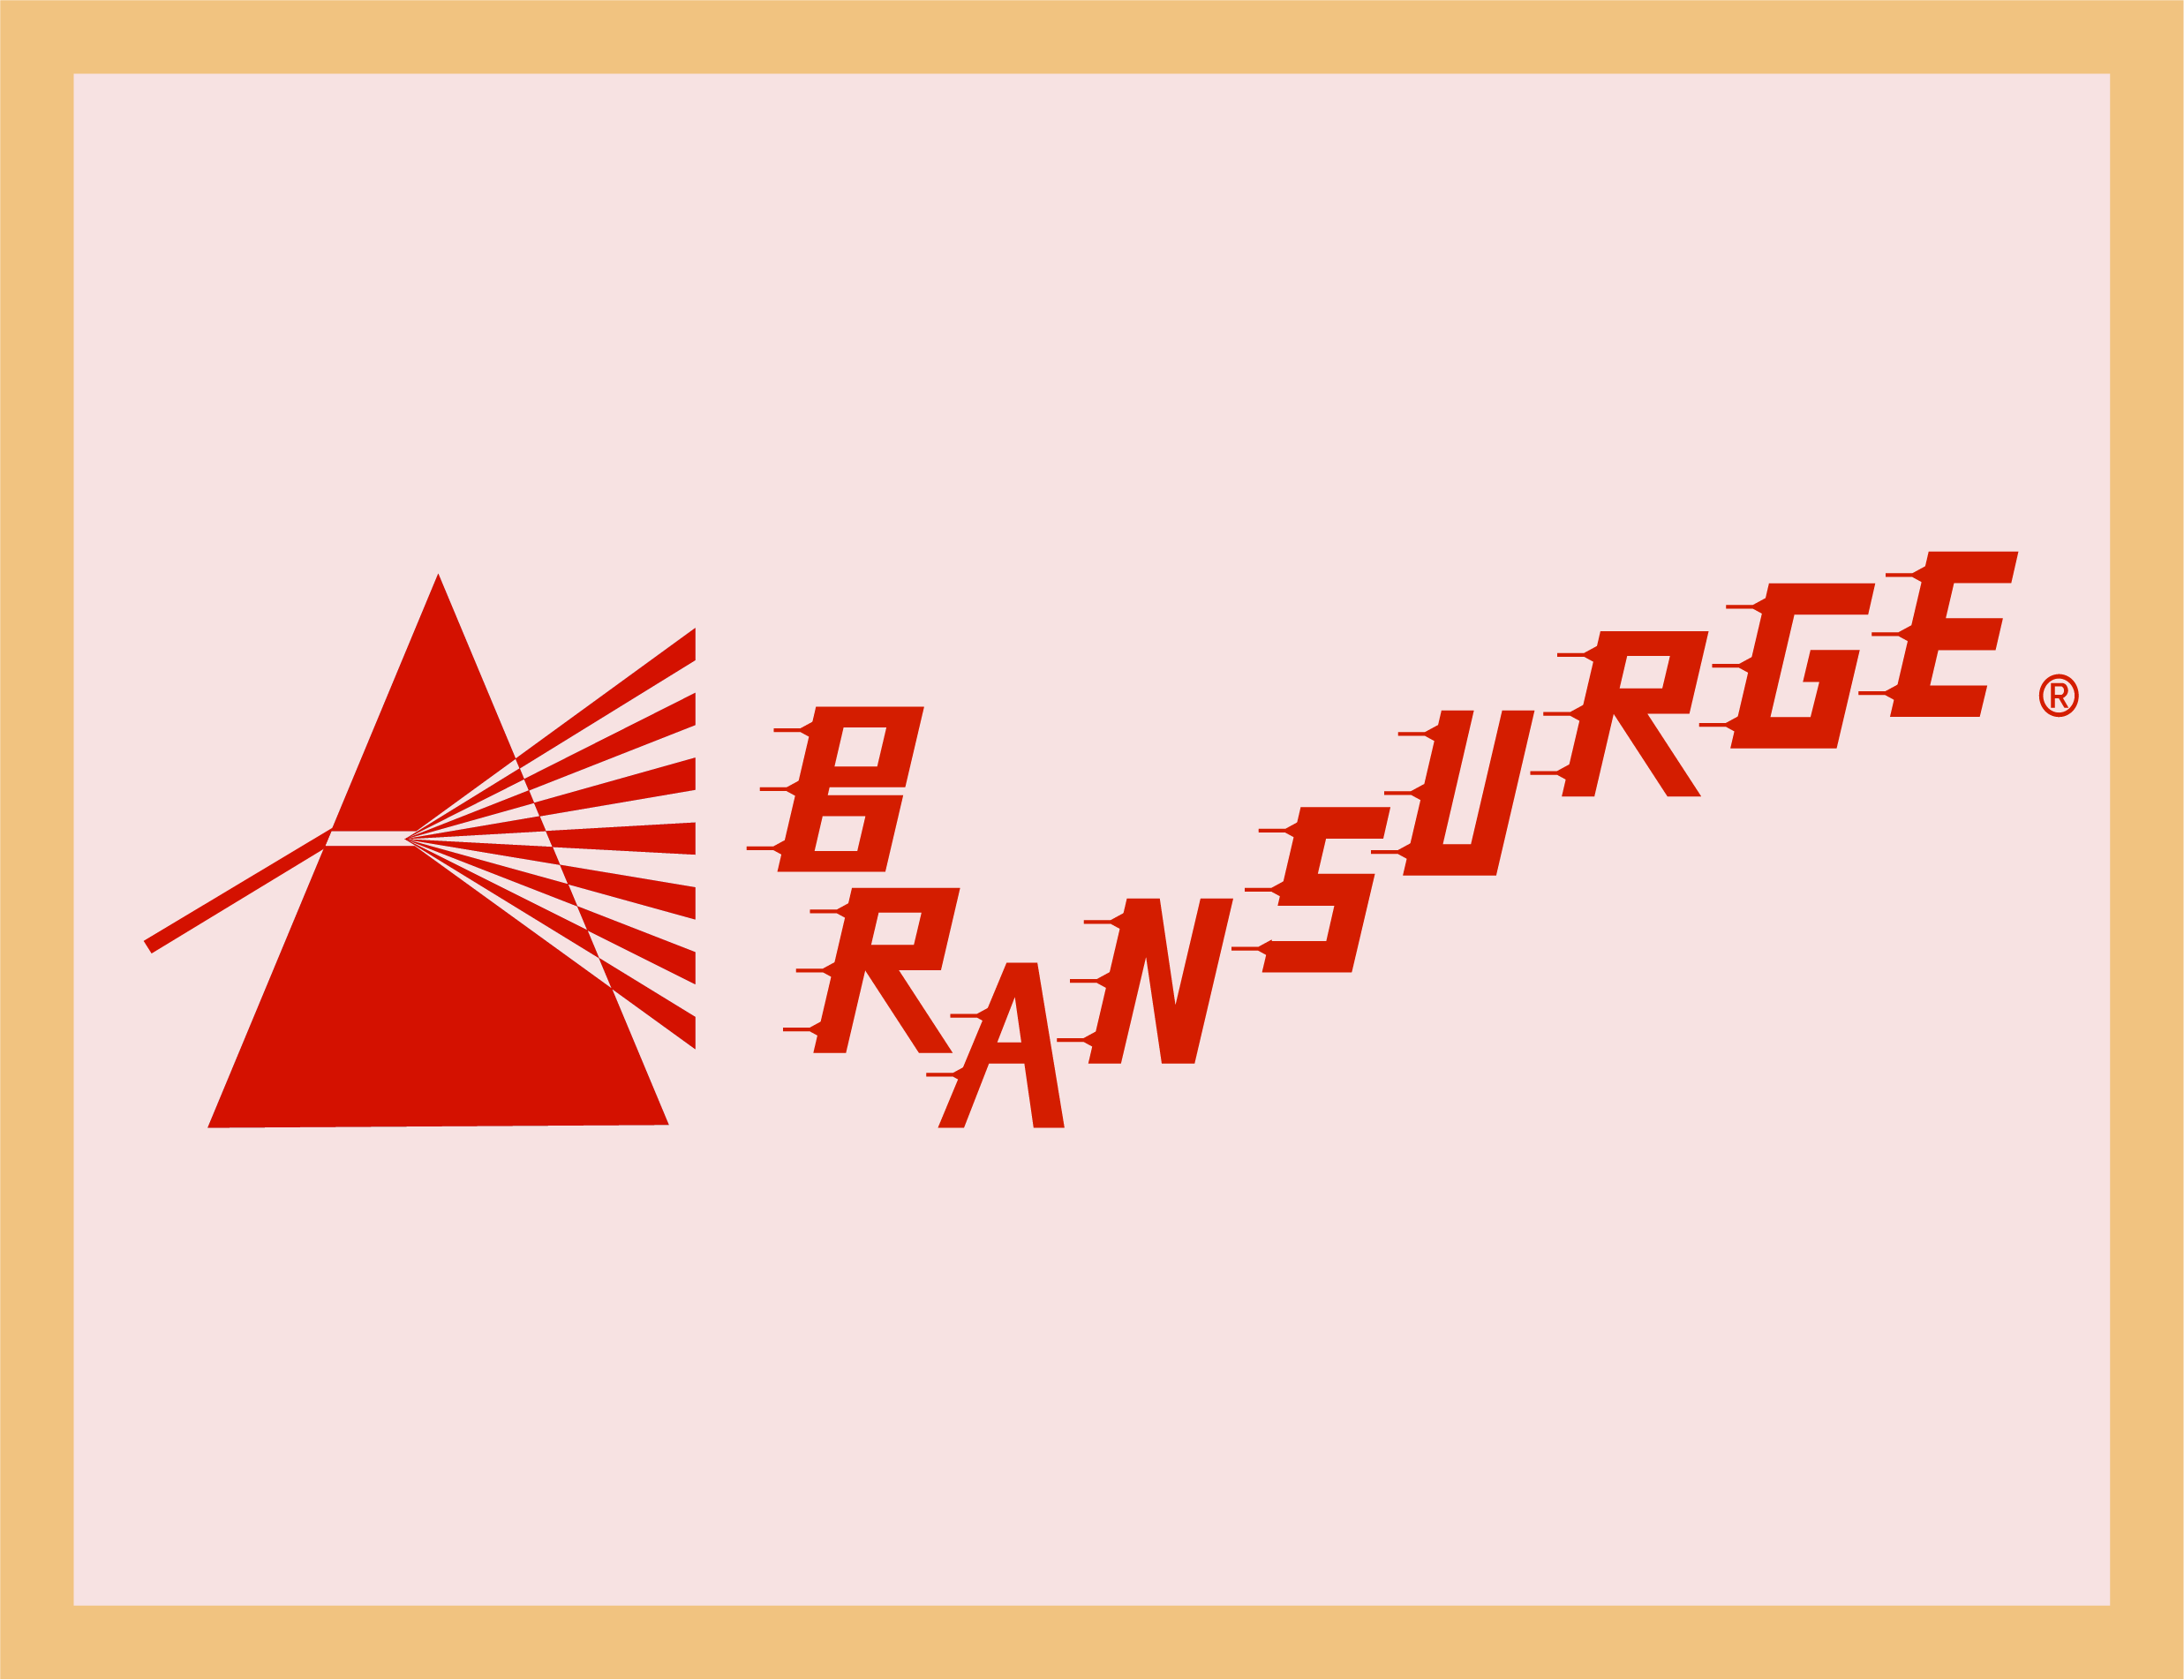 Logo of BRANSURGE - the research product that is the 'marketing strategy assessor'